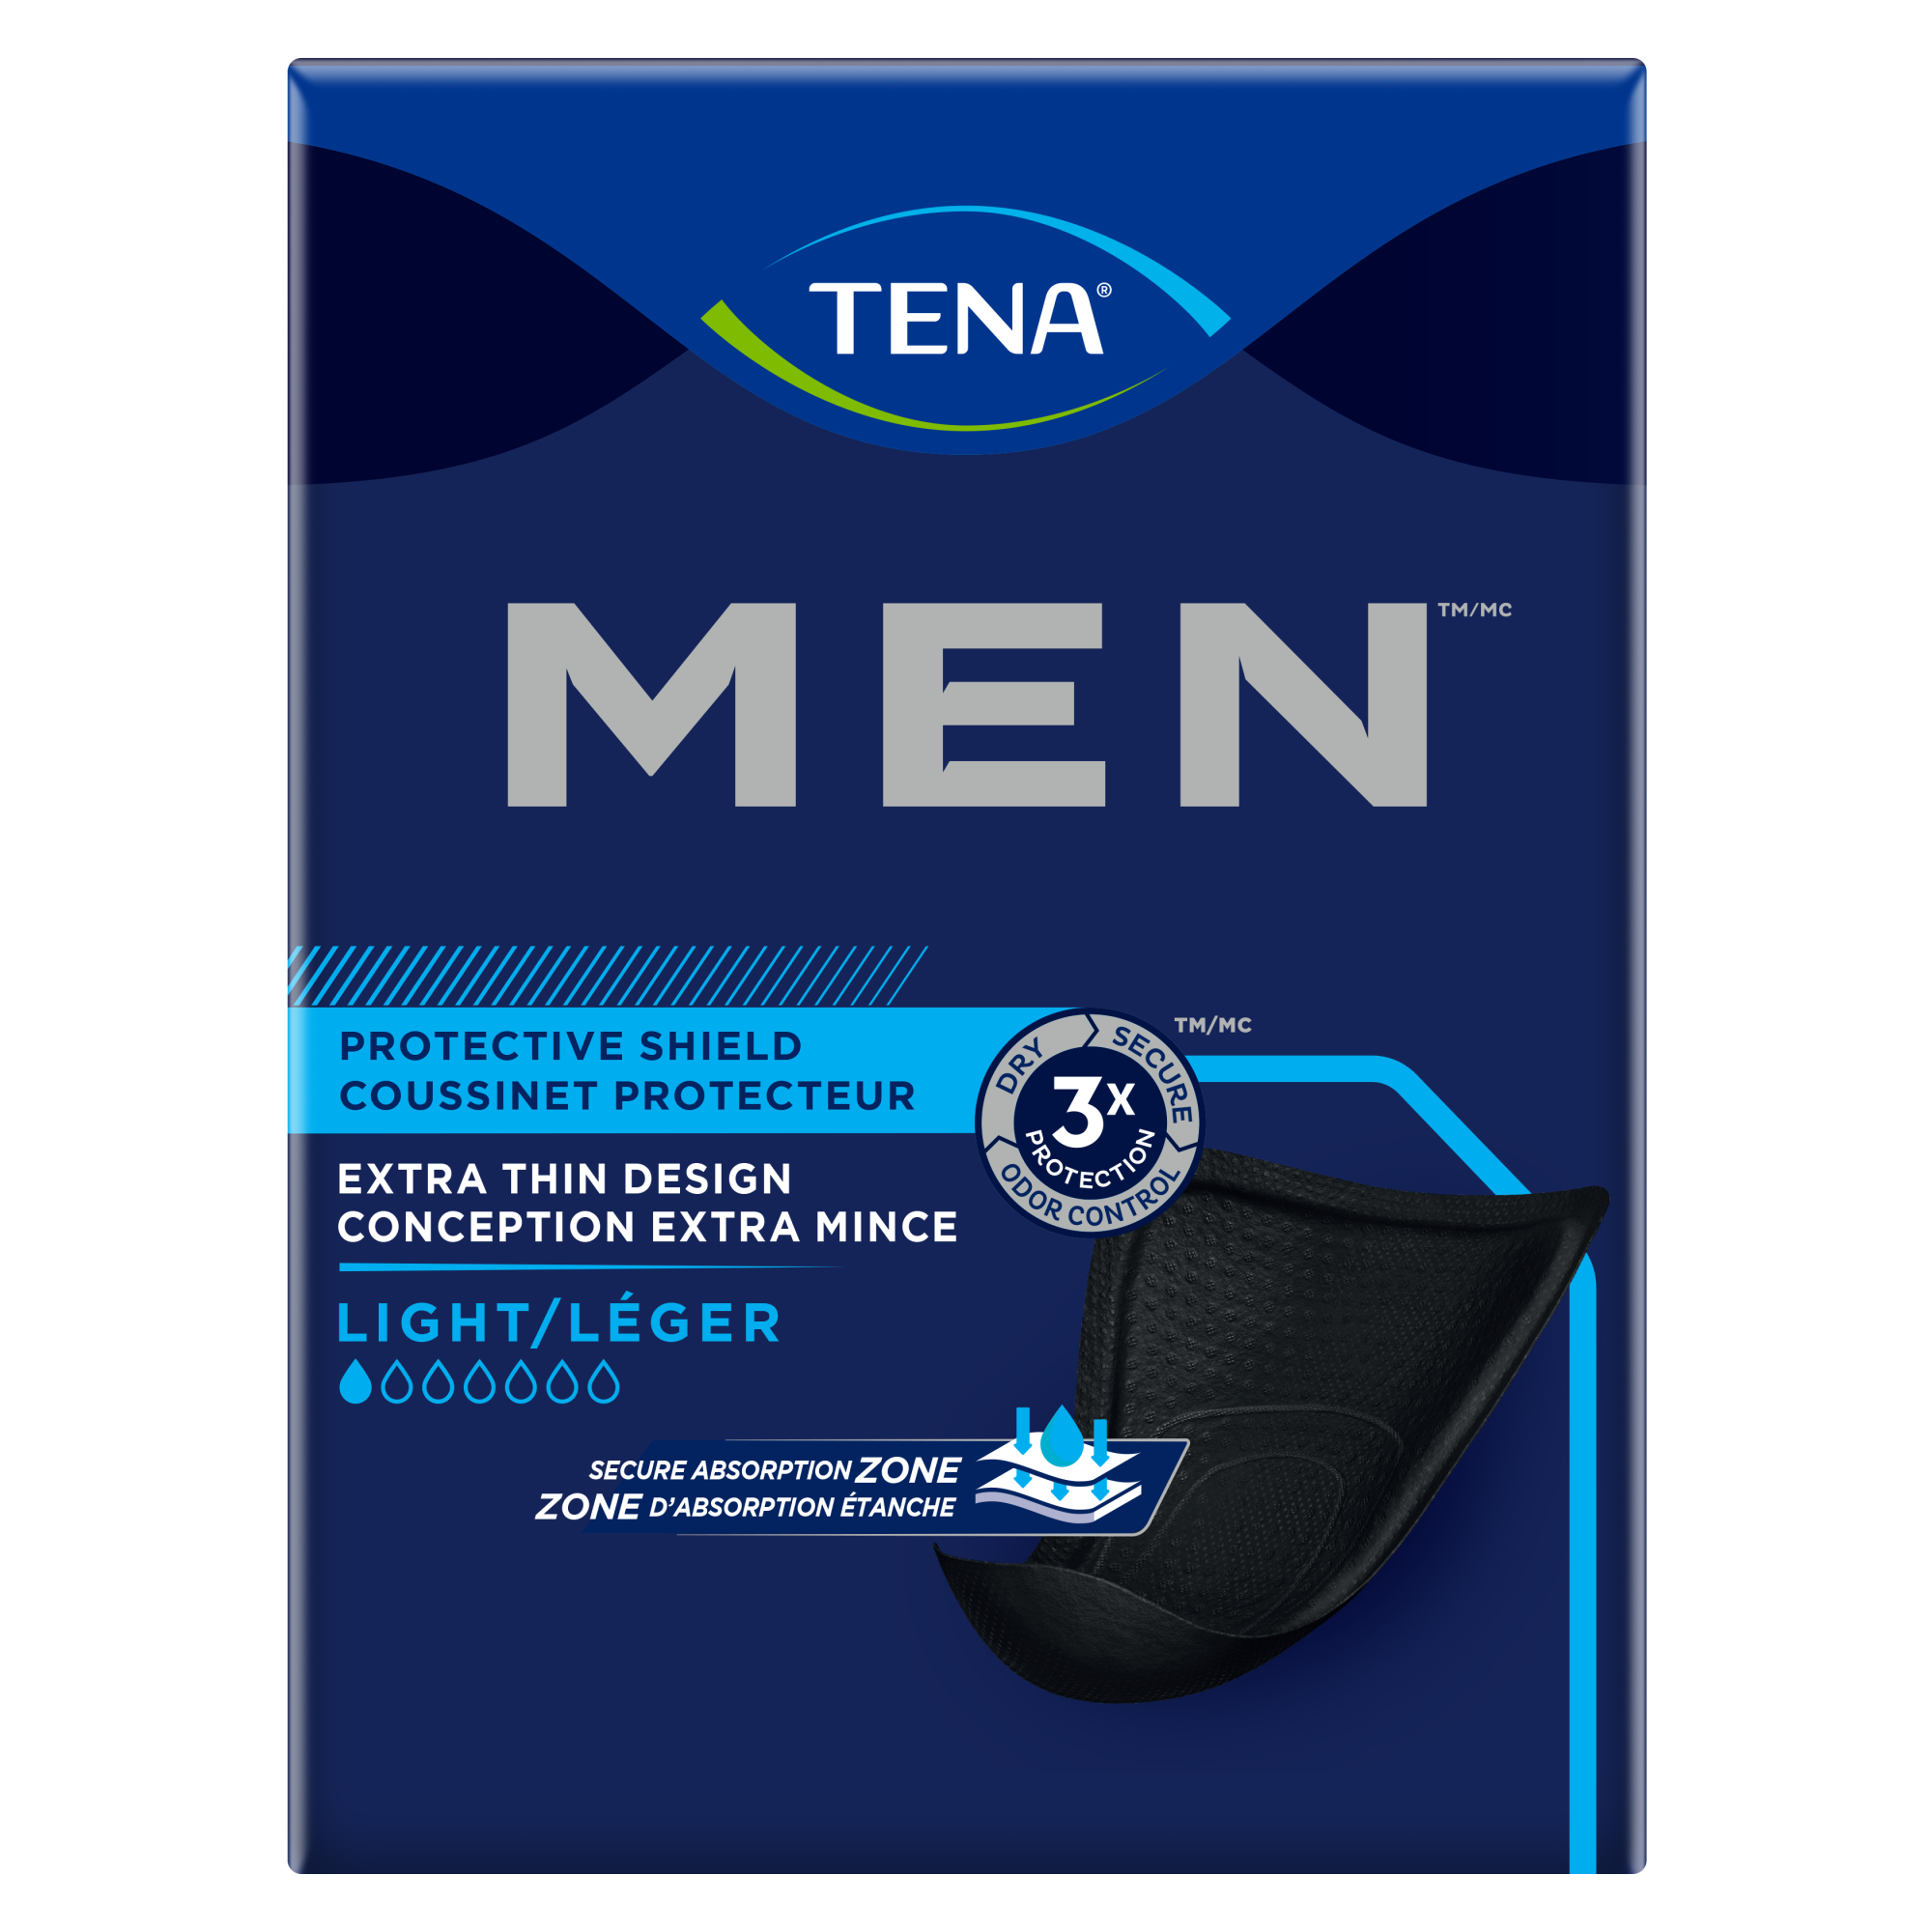 Incontinence pad - Abena Man male protective underwear liner pads